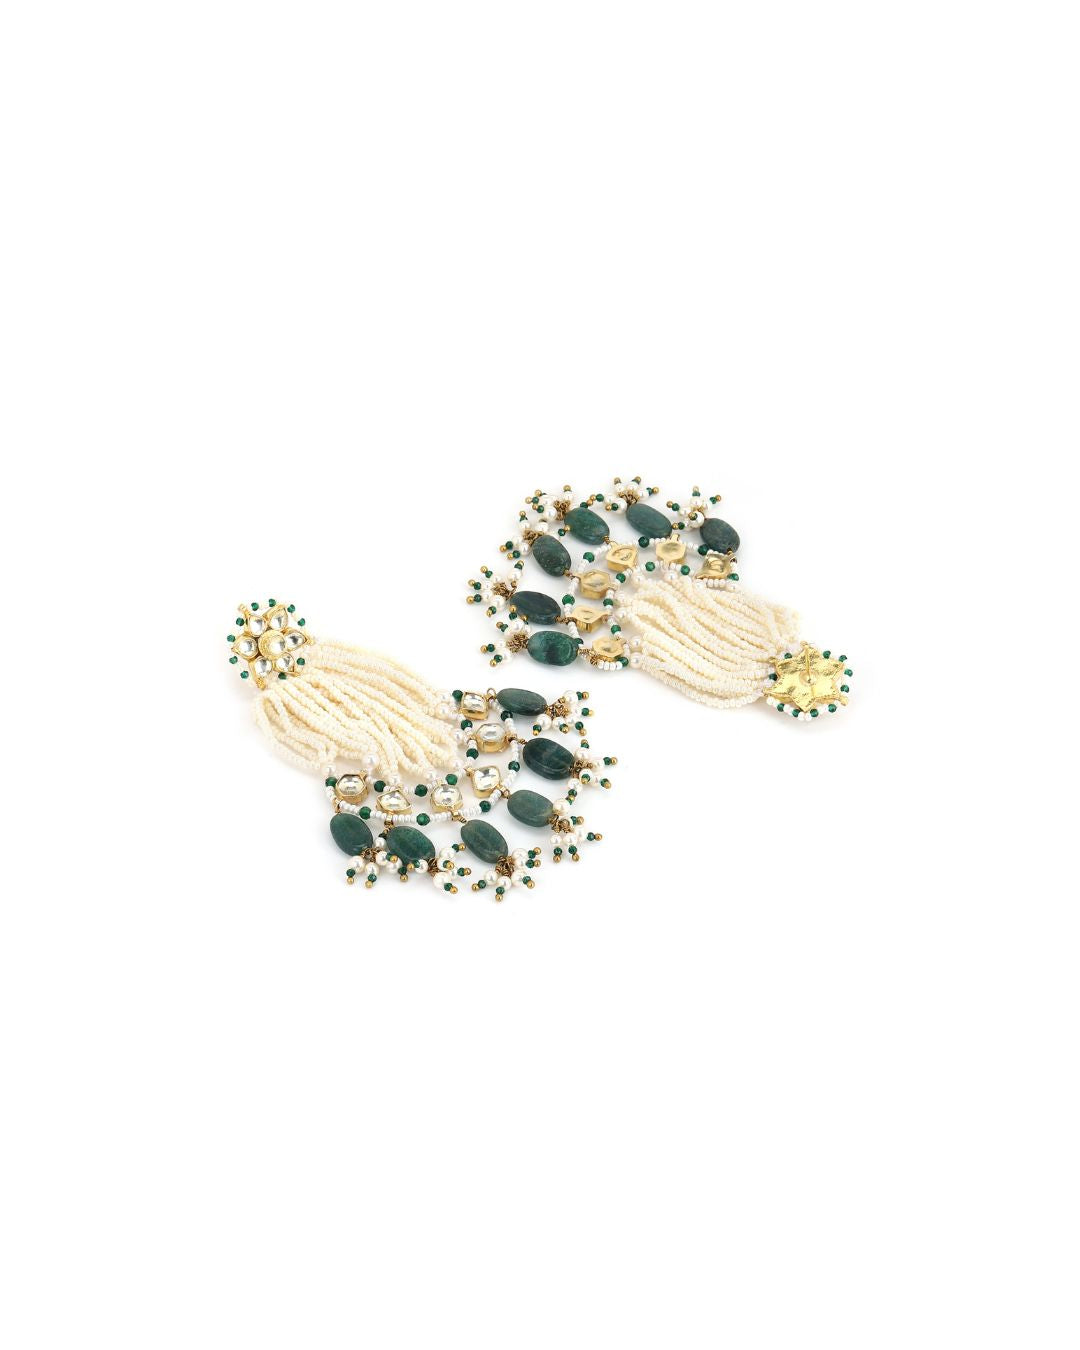 Apate Cheed Passa Earrings- Handcrafted Jewellery from Heer